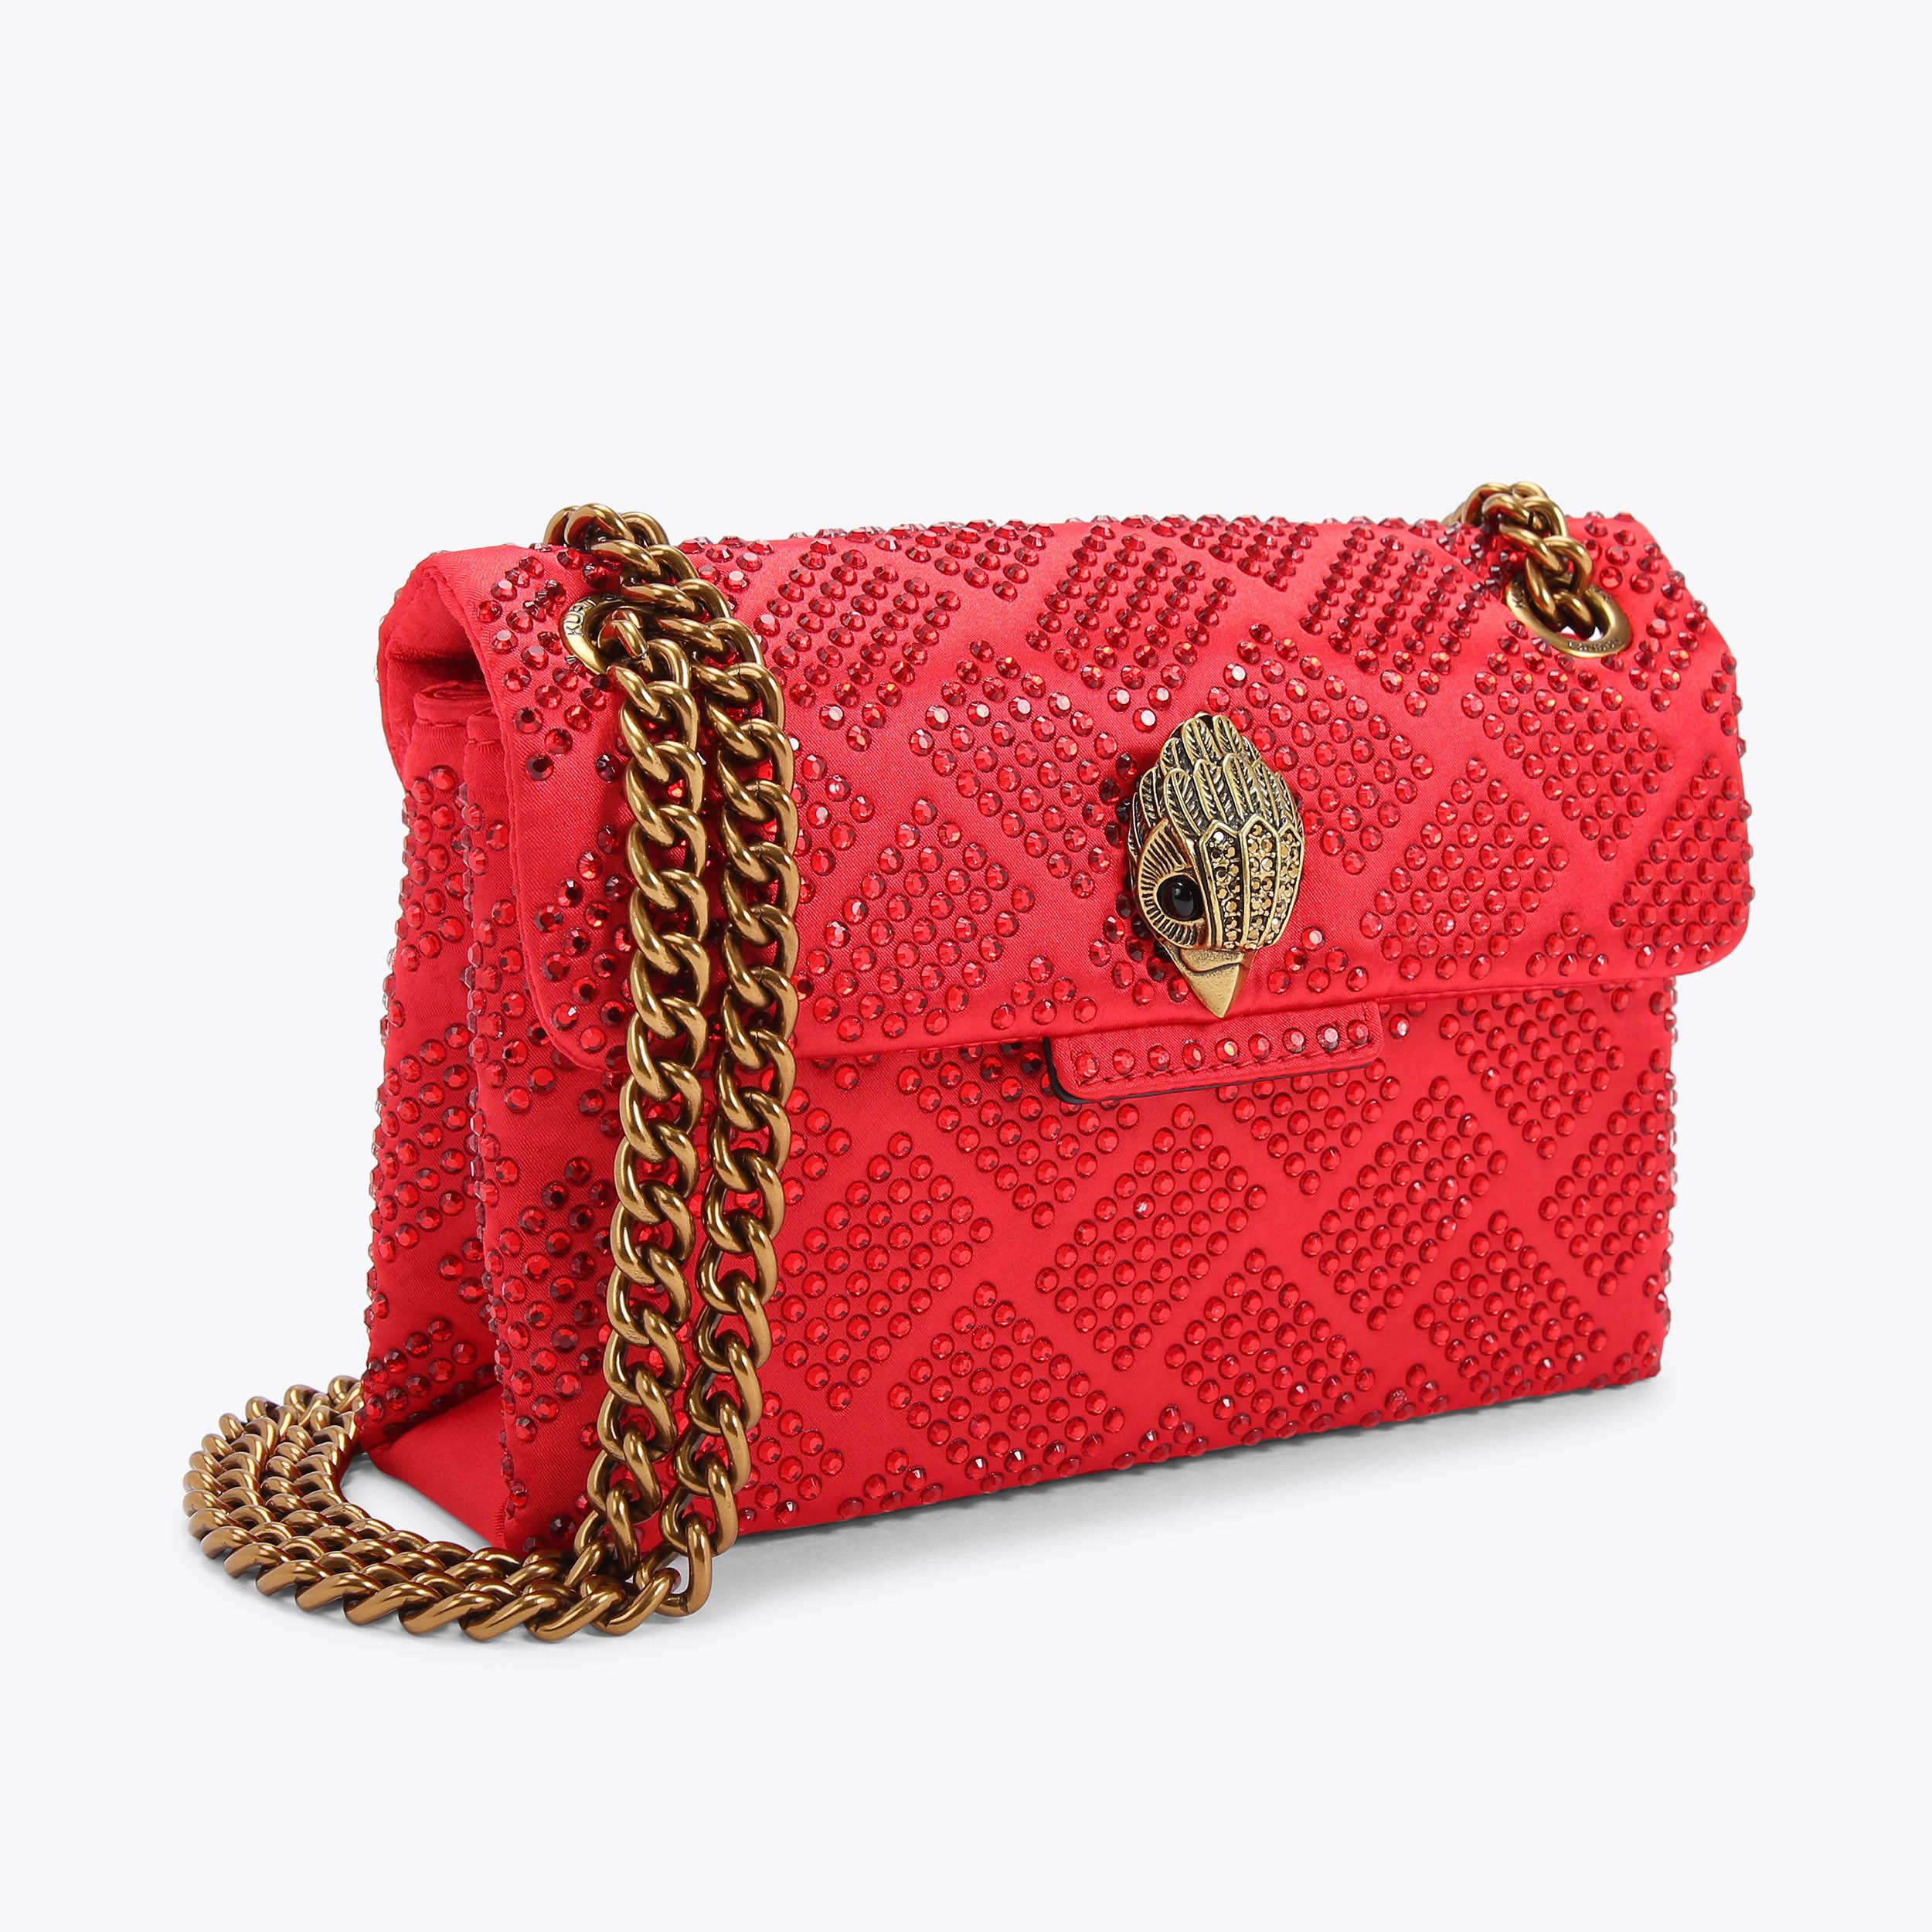 FABRIC MINI KENSINGTON Red Crystal Quilted Cross Body Bag by KURT ...